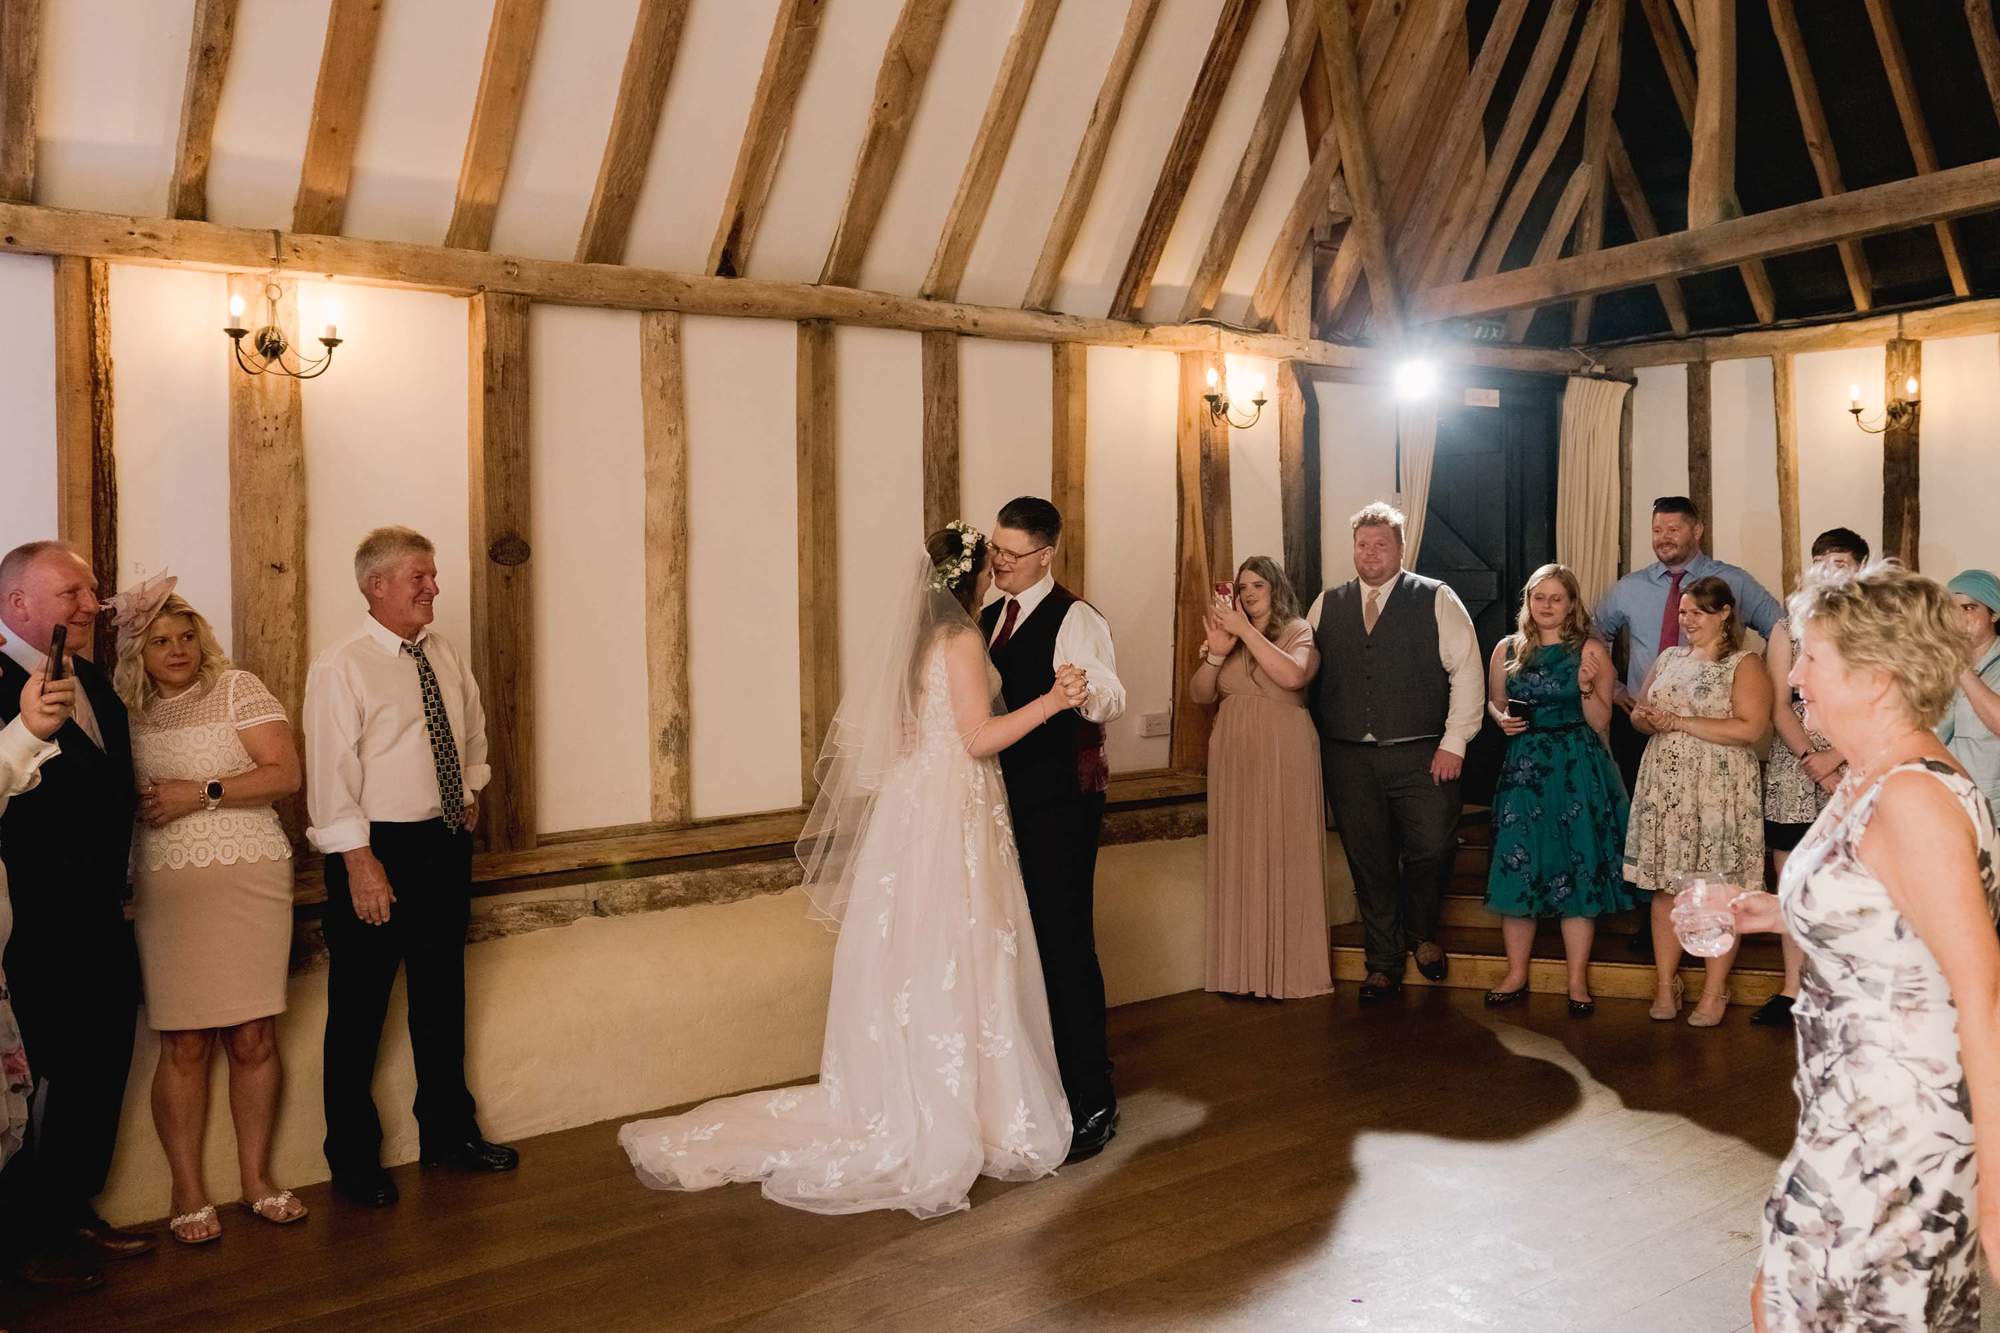 Newlyweds share their first dance at the Clock Barn.